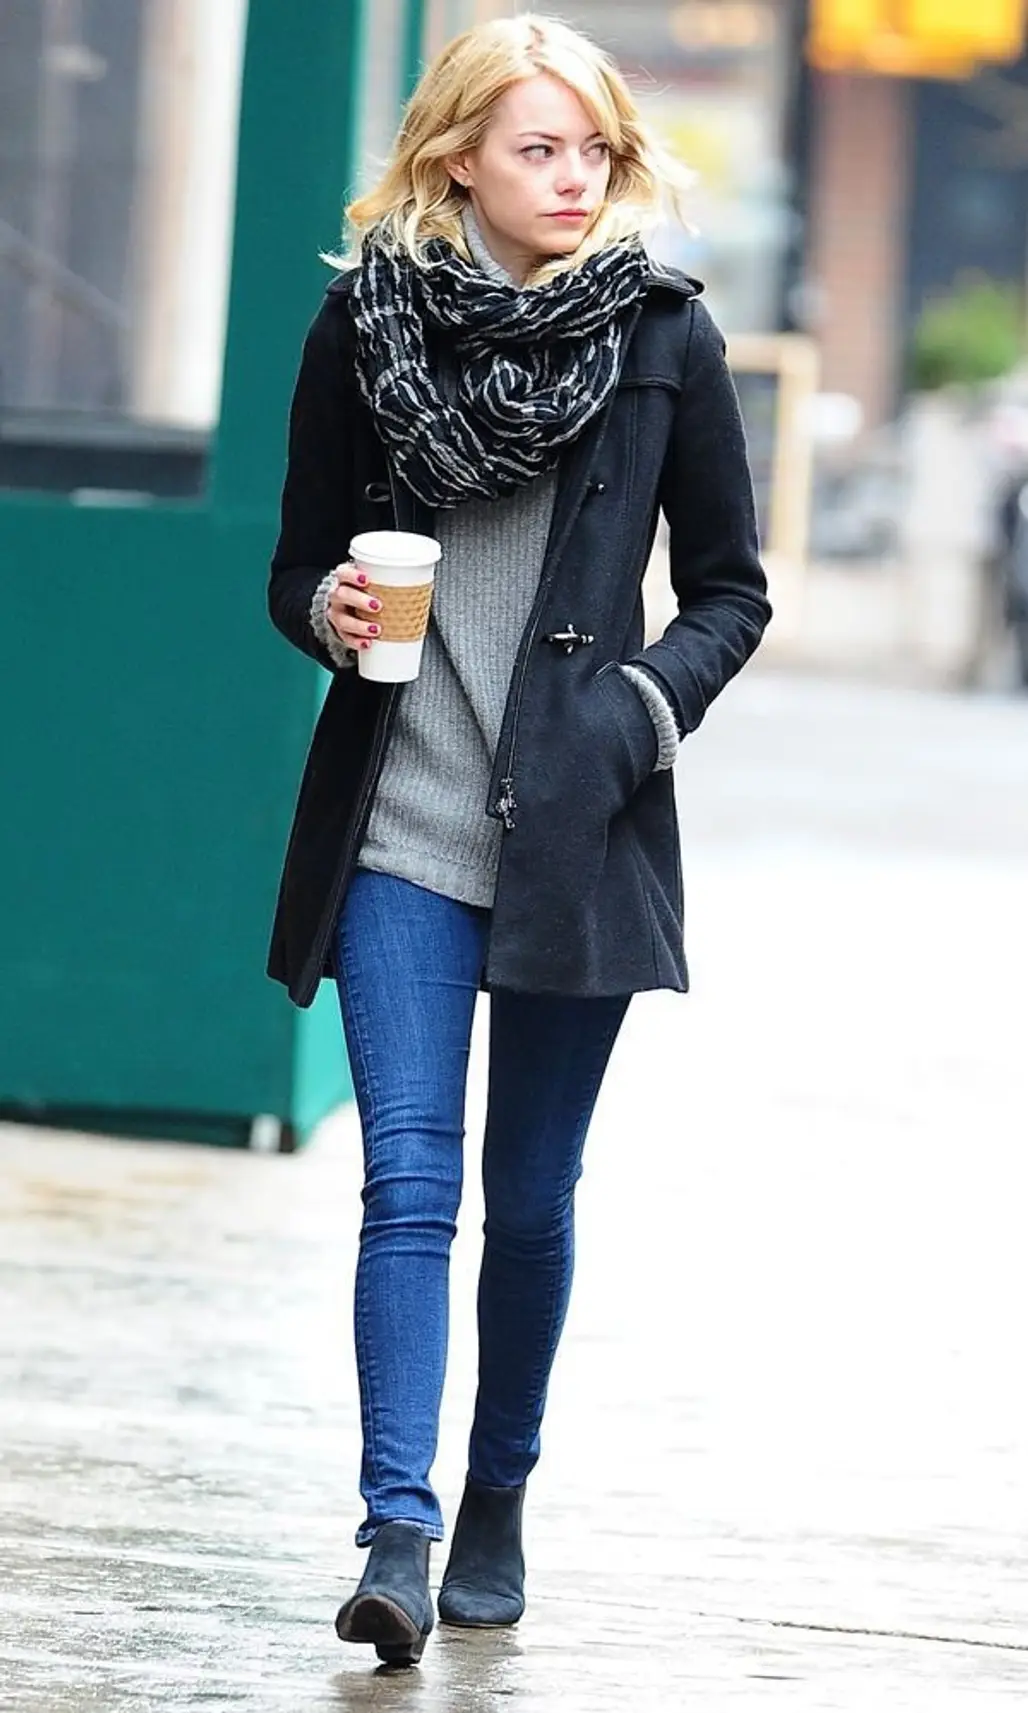 Welcome Sweater Weather with a Cozy Turtleneck, Printed Scarf and Snazzy Ankle Boots